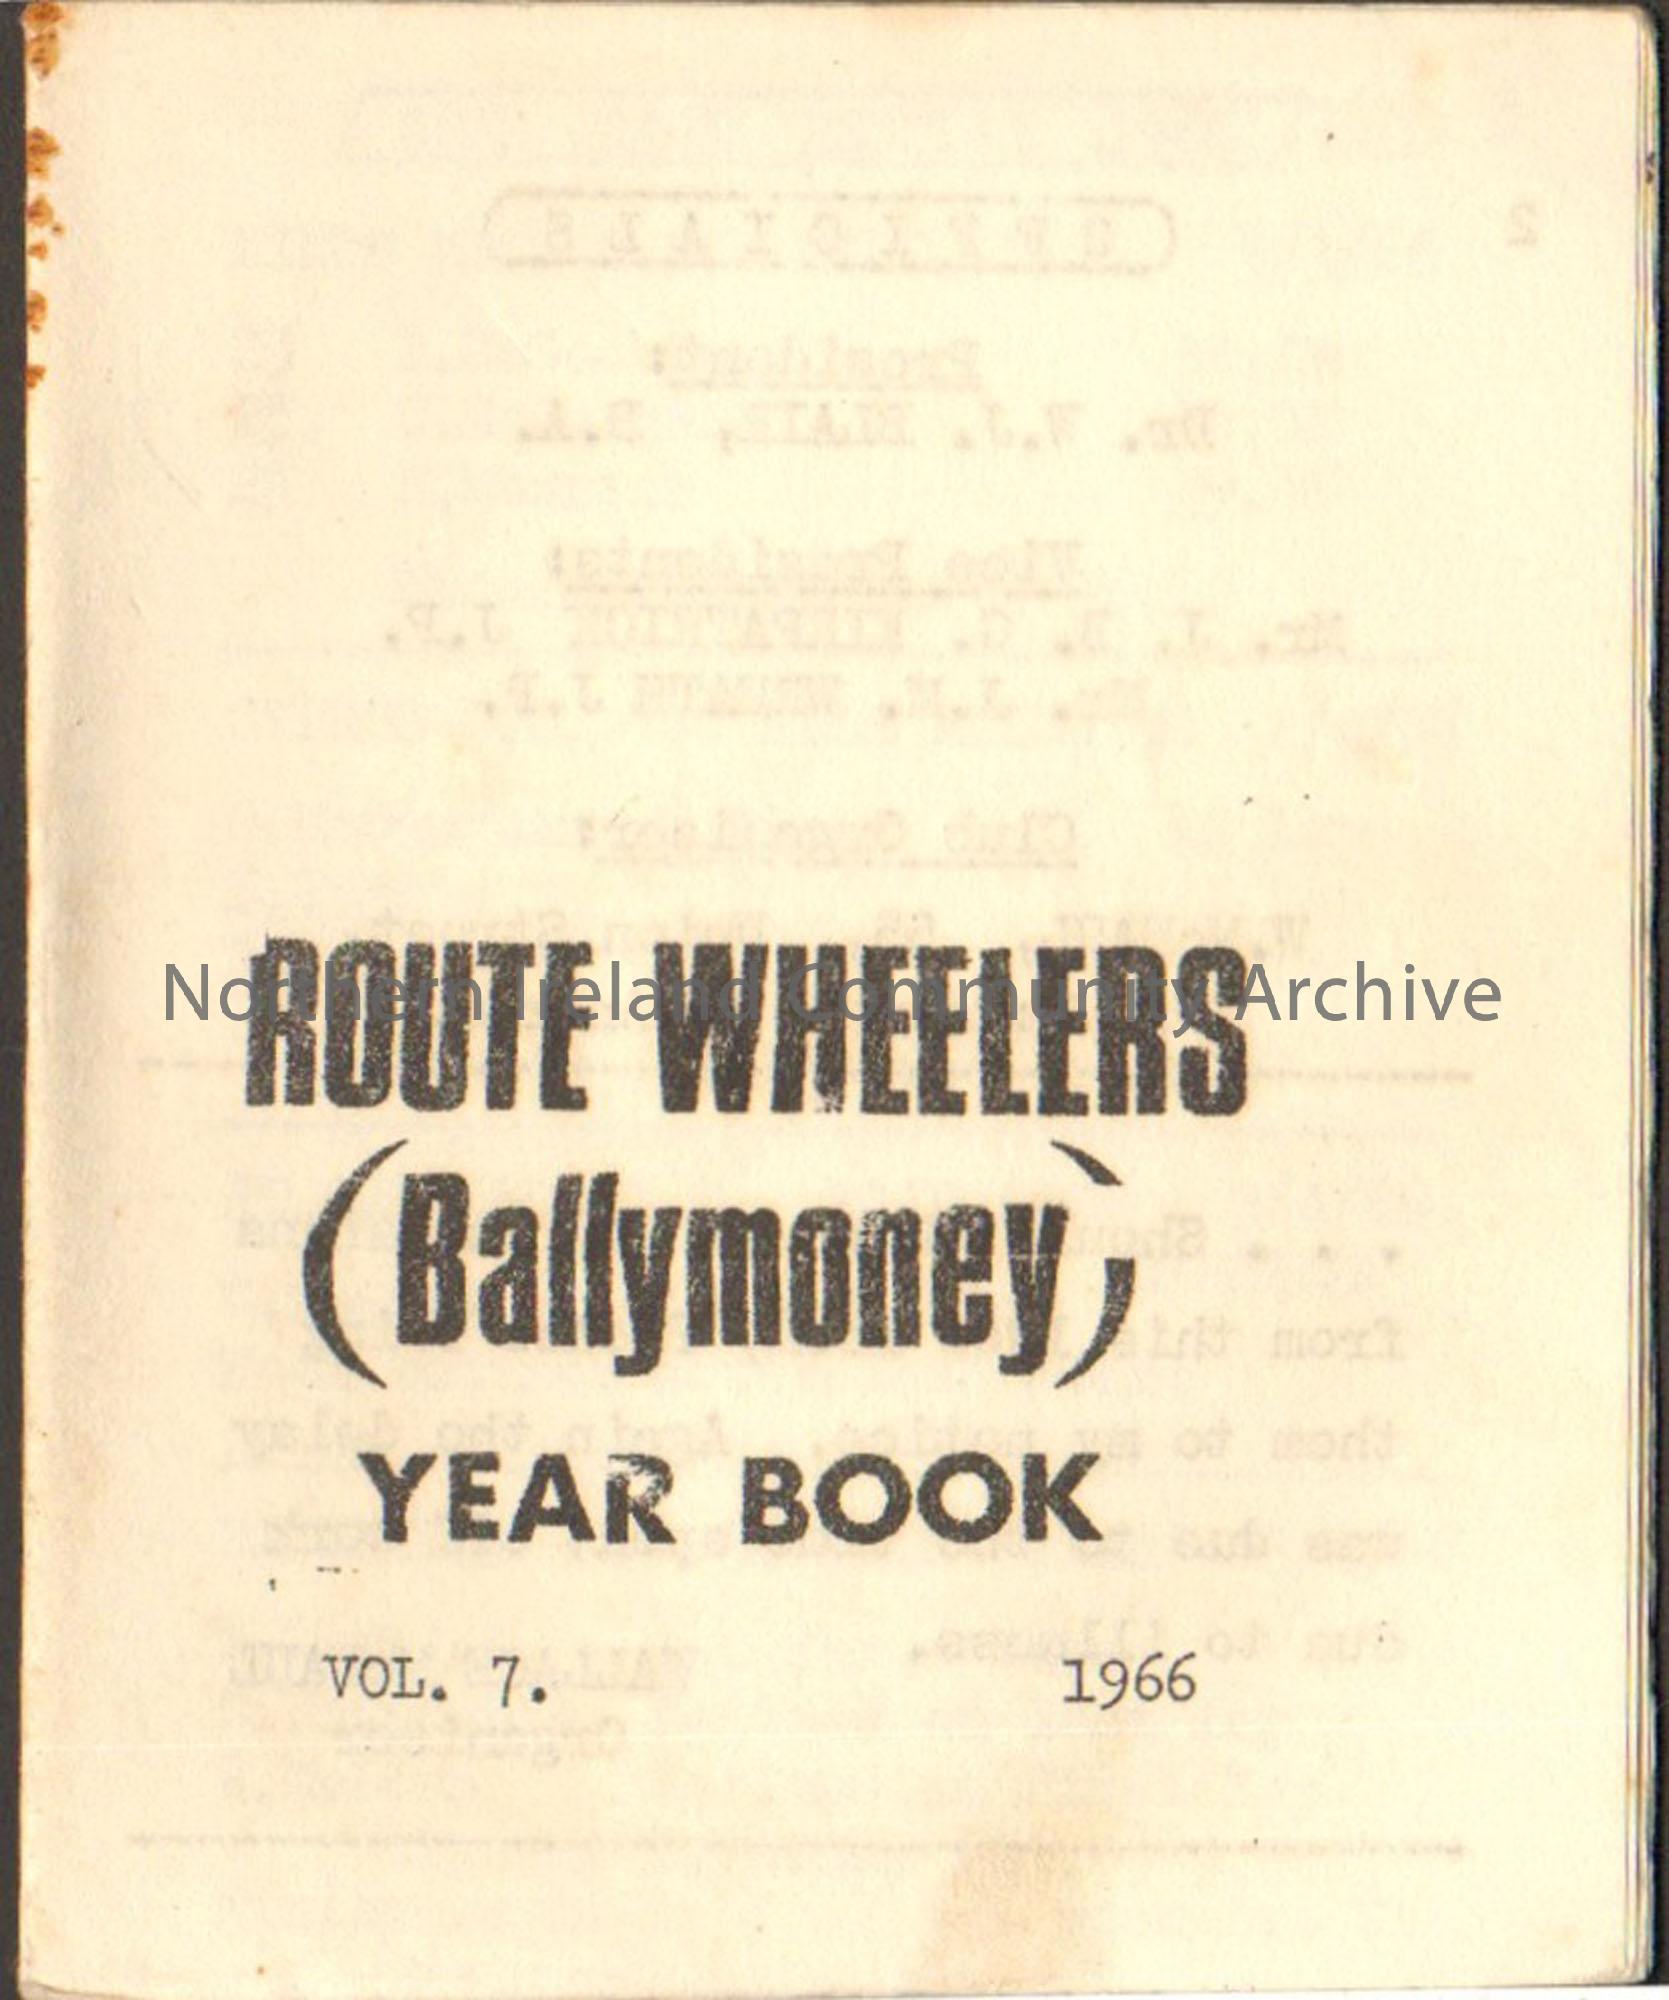 Route Wheelers (Ballymoney) Year Book Vol. 7 1966. White booklet.